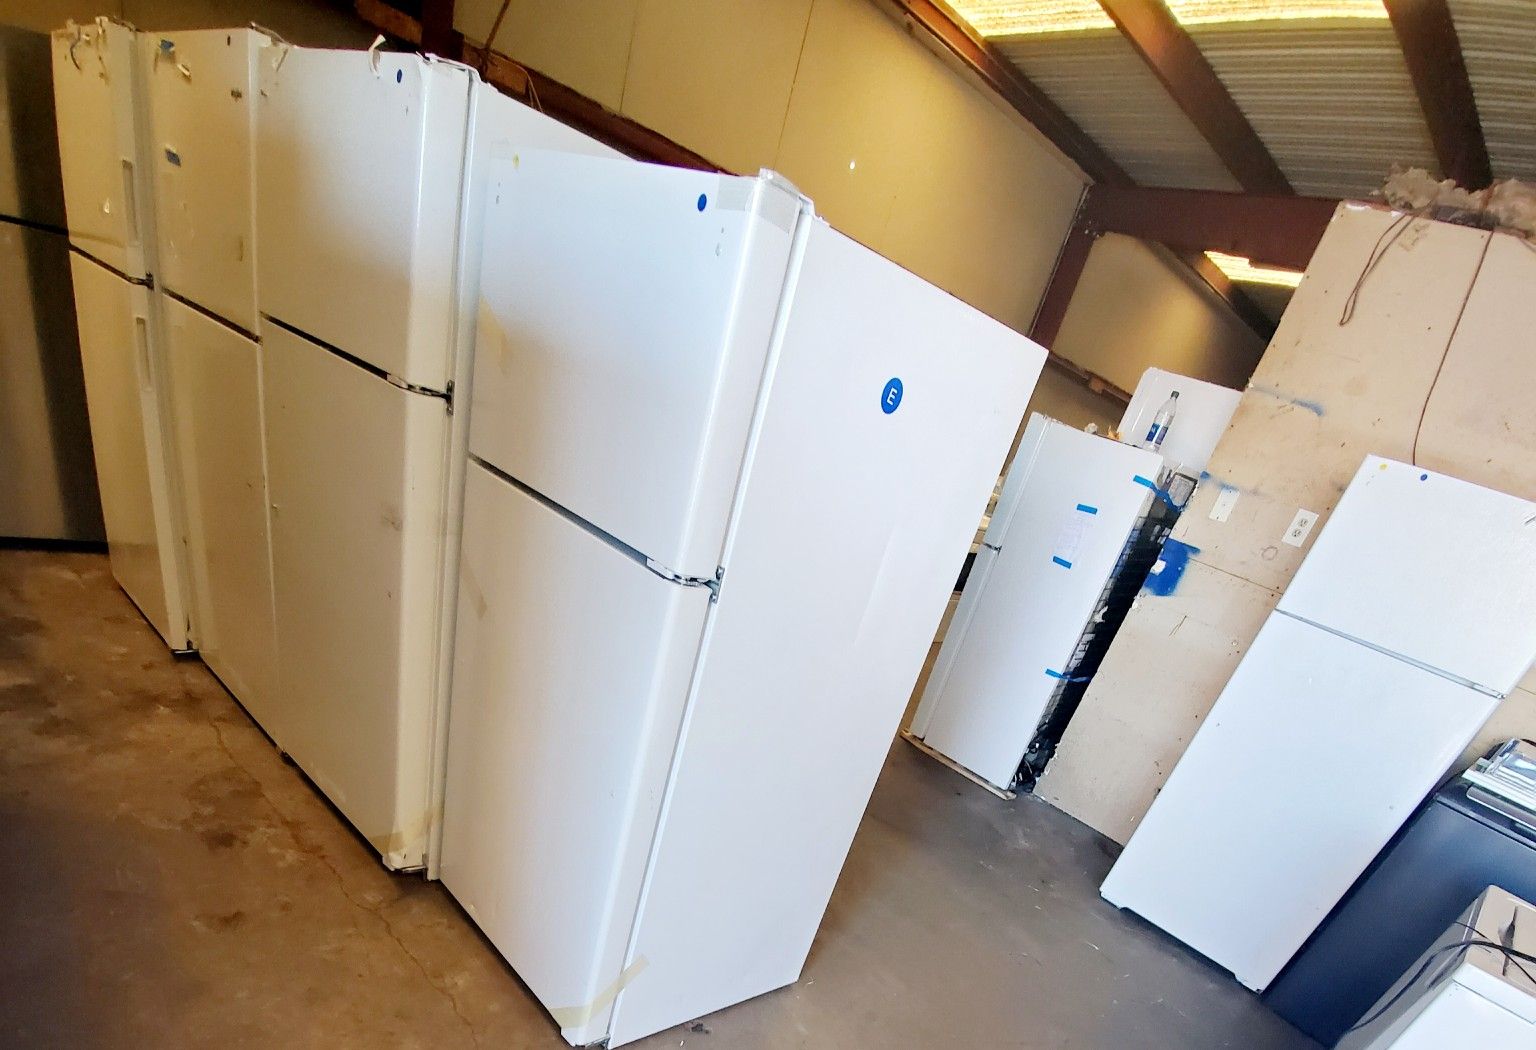 REFRIGERATORS $350 TO $1200--- ALL NEW- SCRATCH AND DENT " IT'S A BUSINESS- WARRANTY